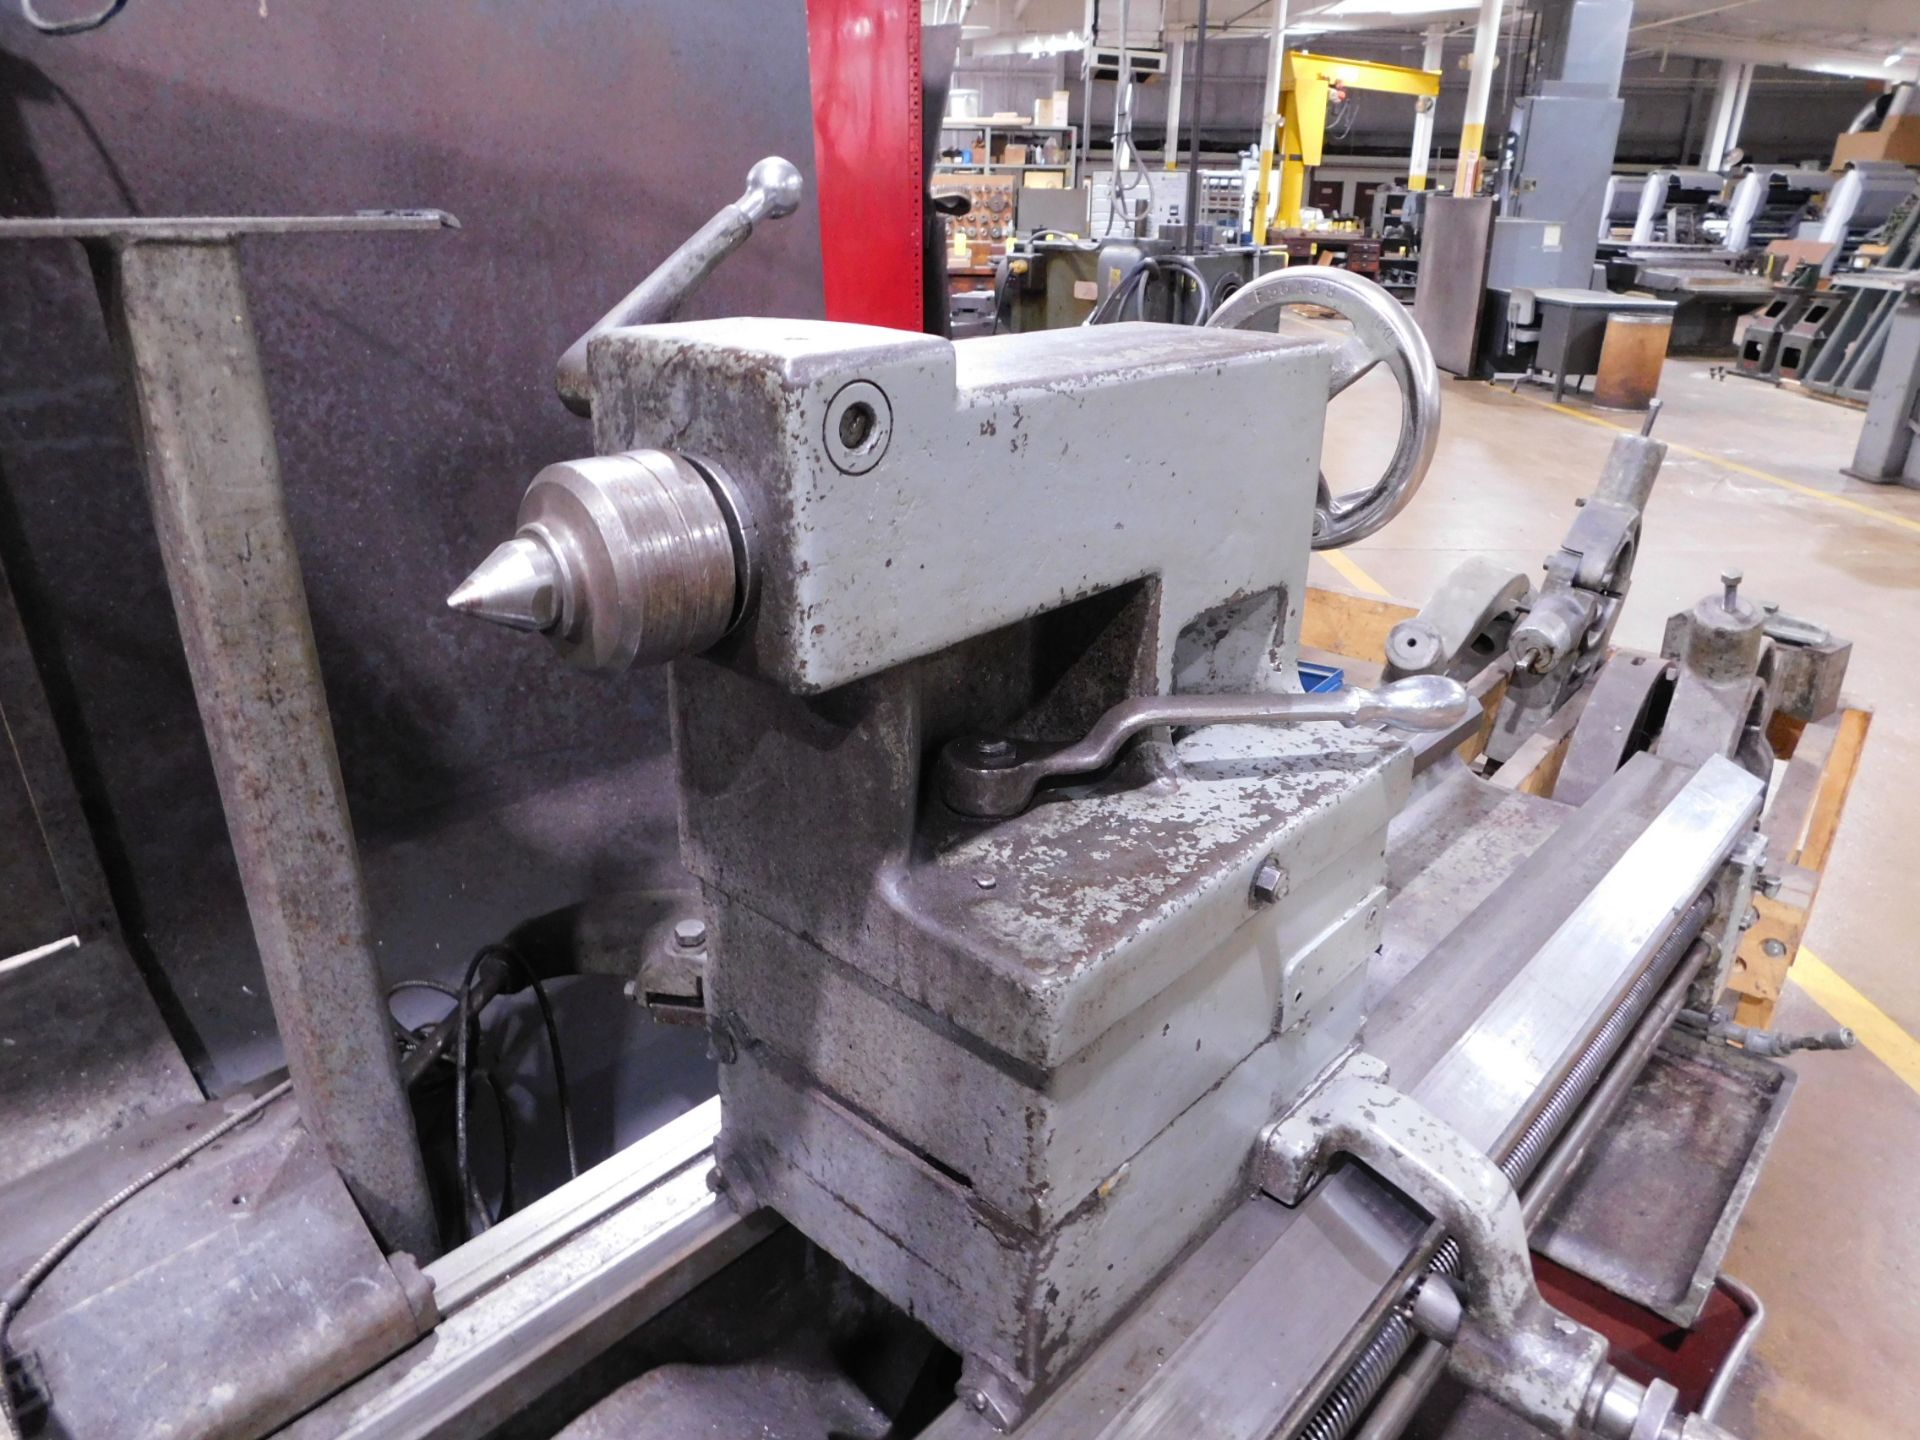 Leblond Raised Head Tool Room Lathe, 36" X 72", s/n 3H-974, 18" 4-Jaw Chuck, (2) Steady Rests, Taper - Image 4 of 11